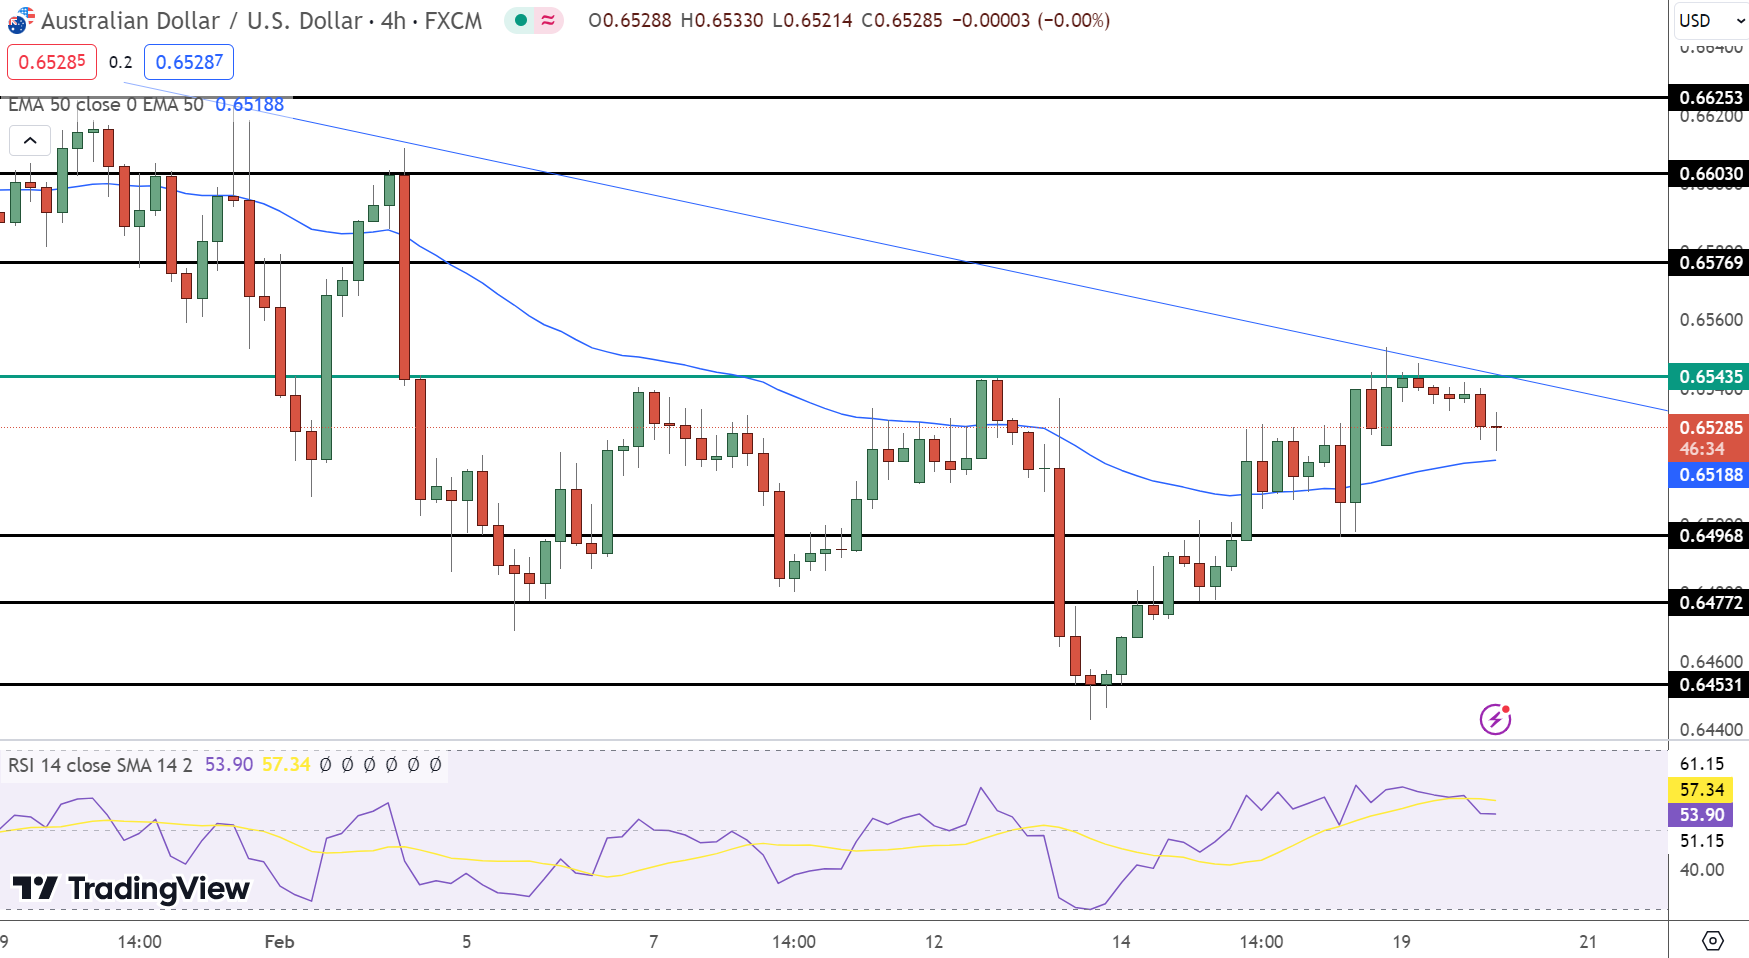 AUD/USD Nears 0.6530: Aussie Faces Downward Pressure Amid Monetary Policy Anticipation